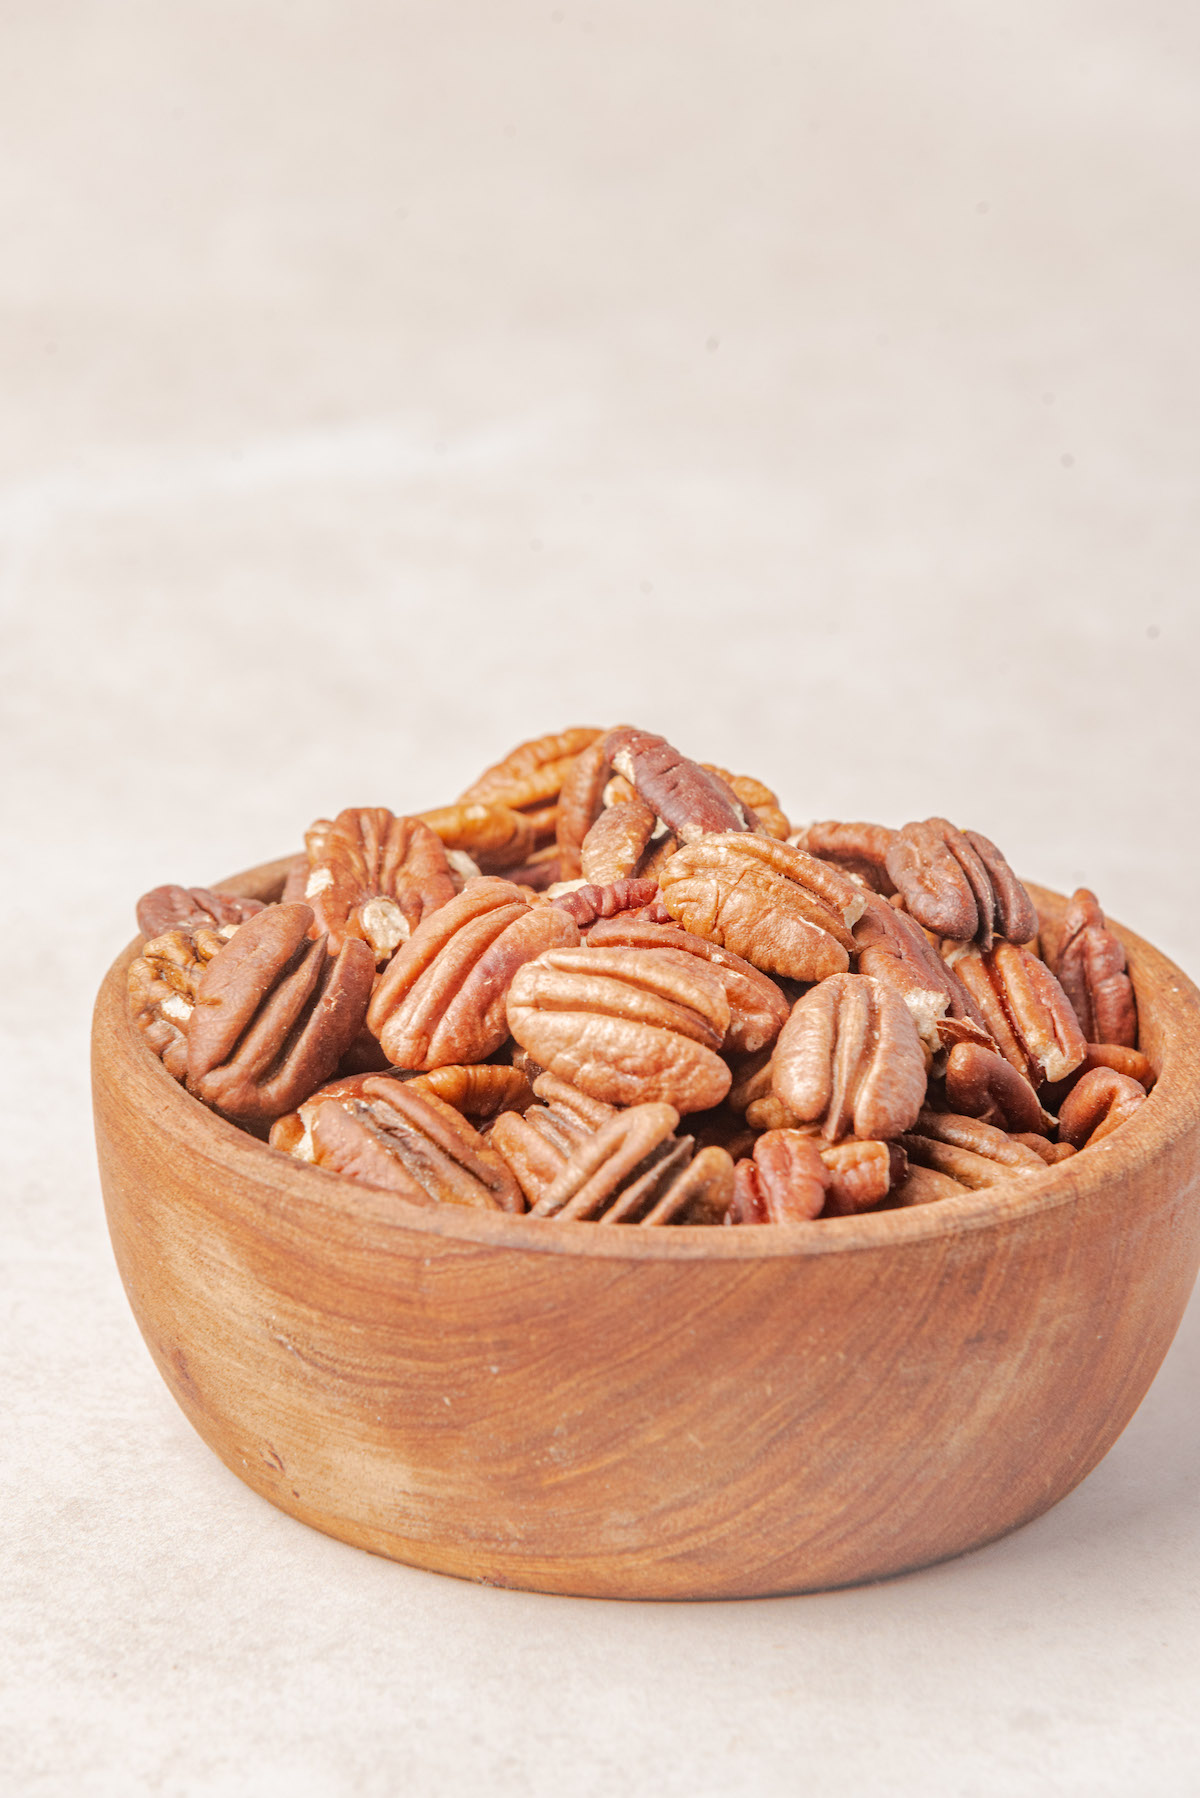 a wooden bowl containing the finished toasted pecans